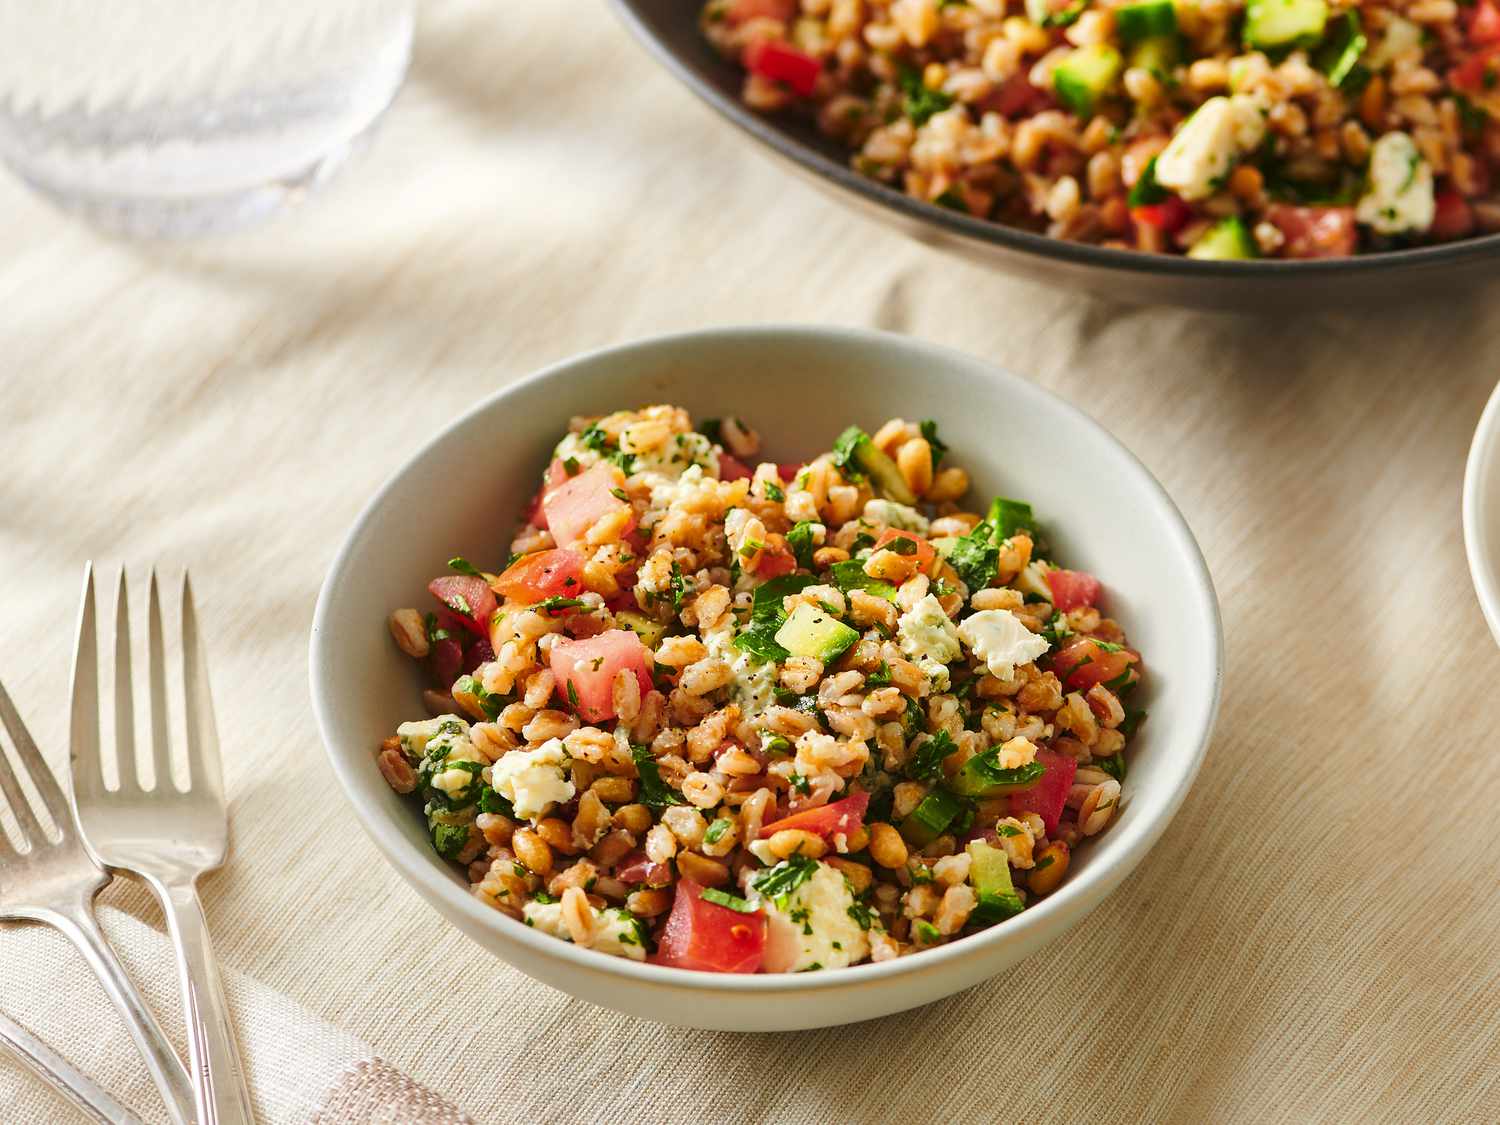 Serving of farro salad with blue cheese, pine nuts, and tomatoes served inside a bowl